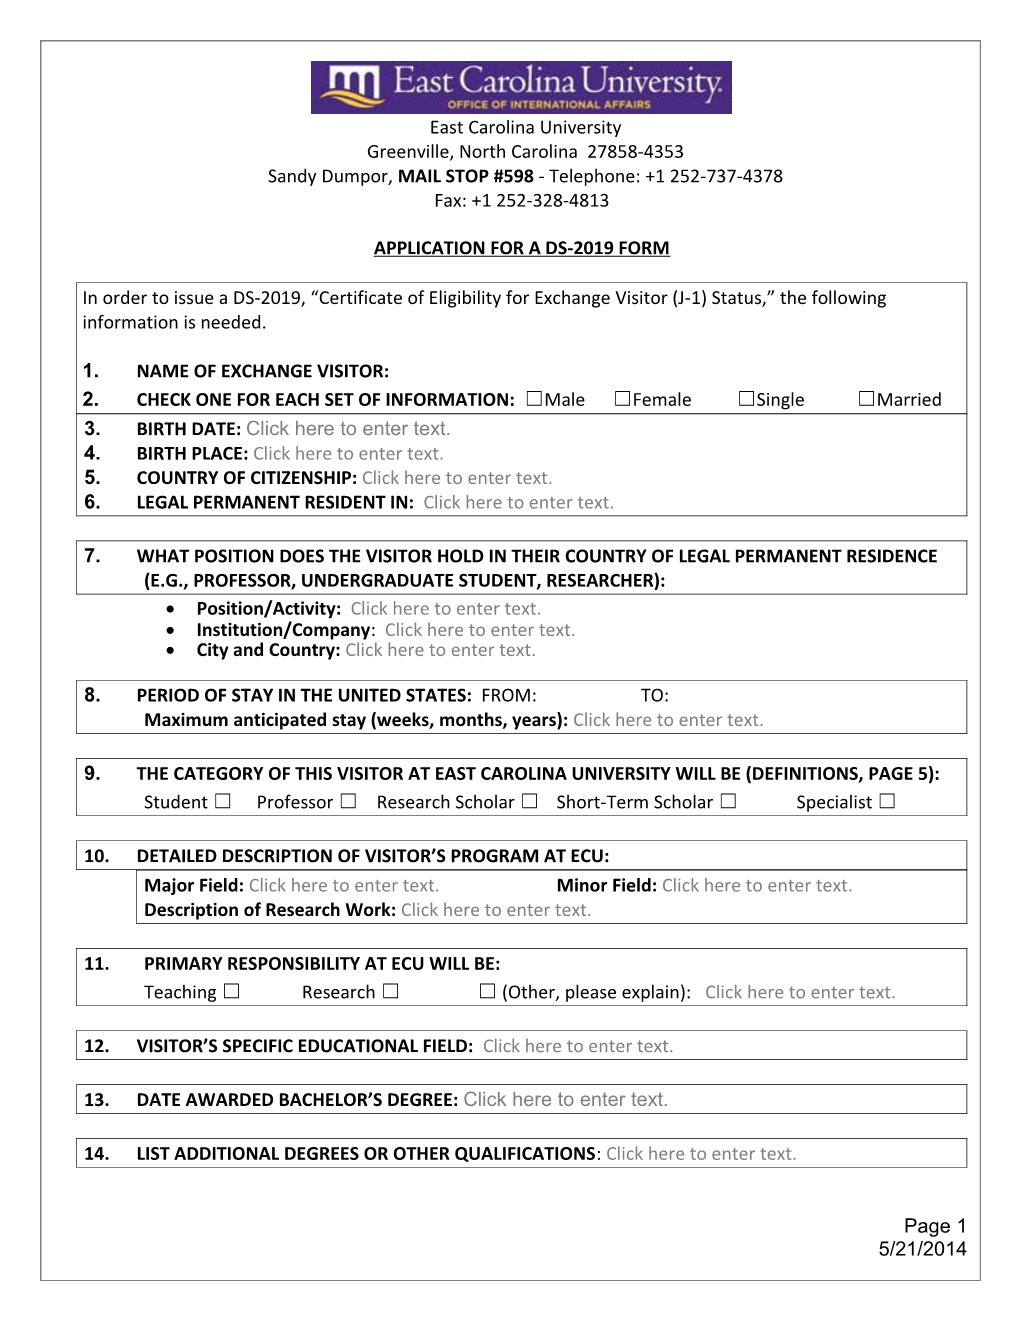 Application for a Form Iap-66